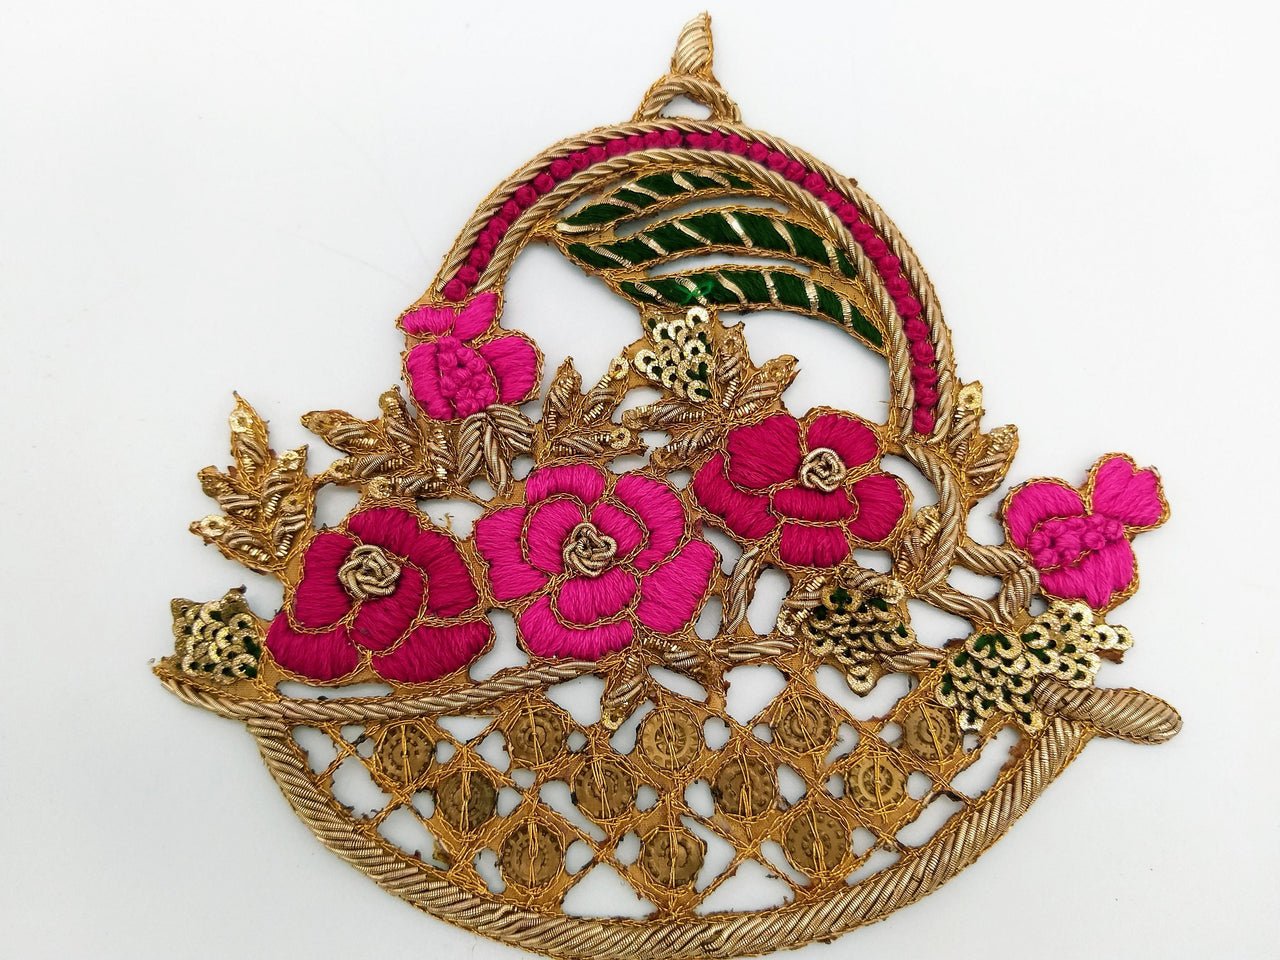 Hand Embroidered Zardozi Flower Basket Applique in Fuchsia,Dark Pink and Antique Gold with Gold Sequins